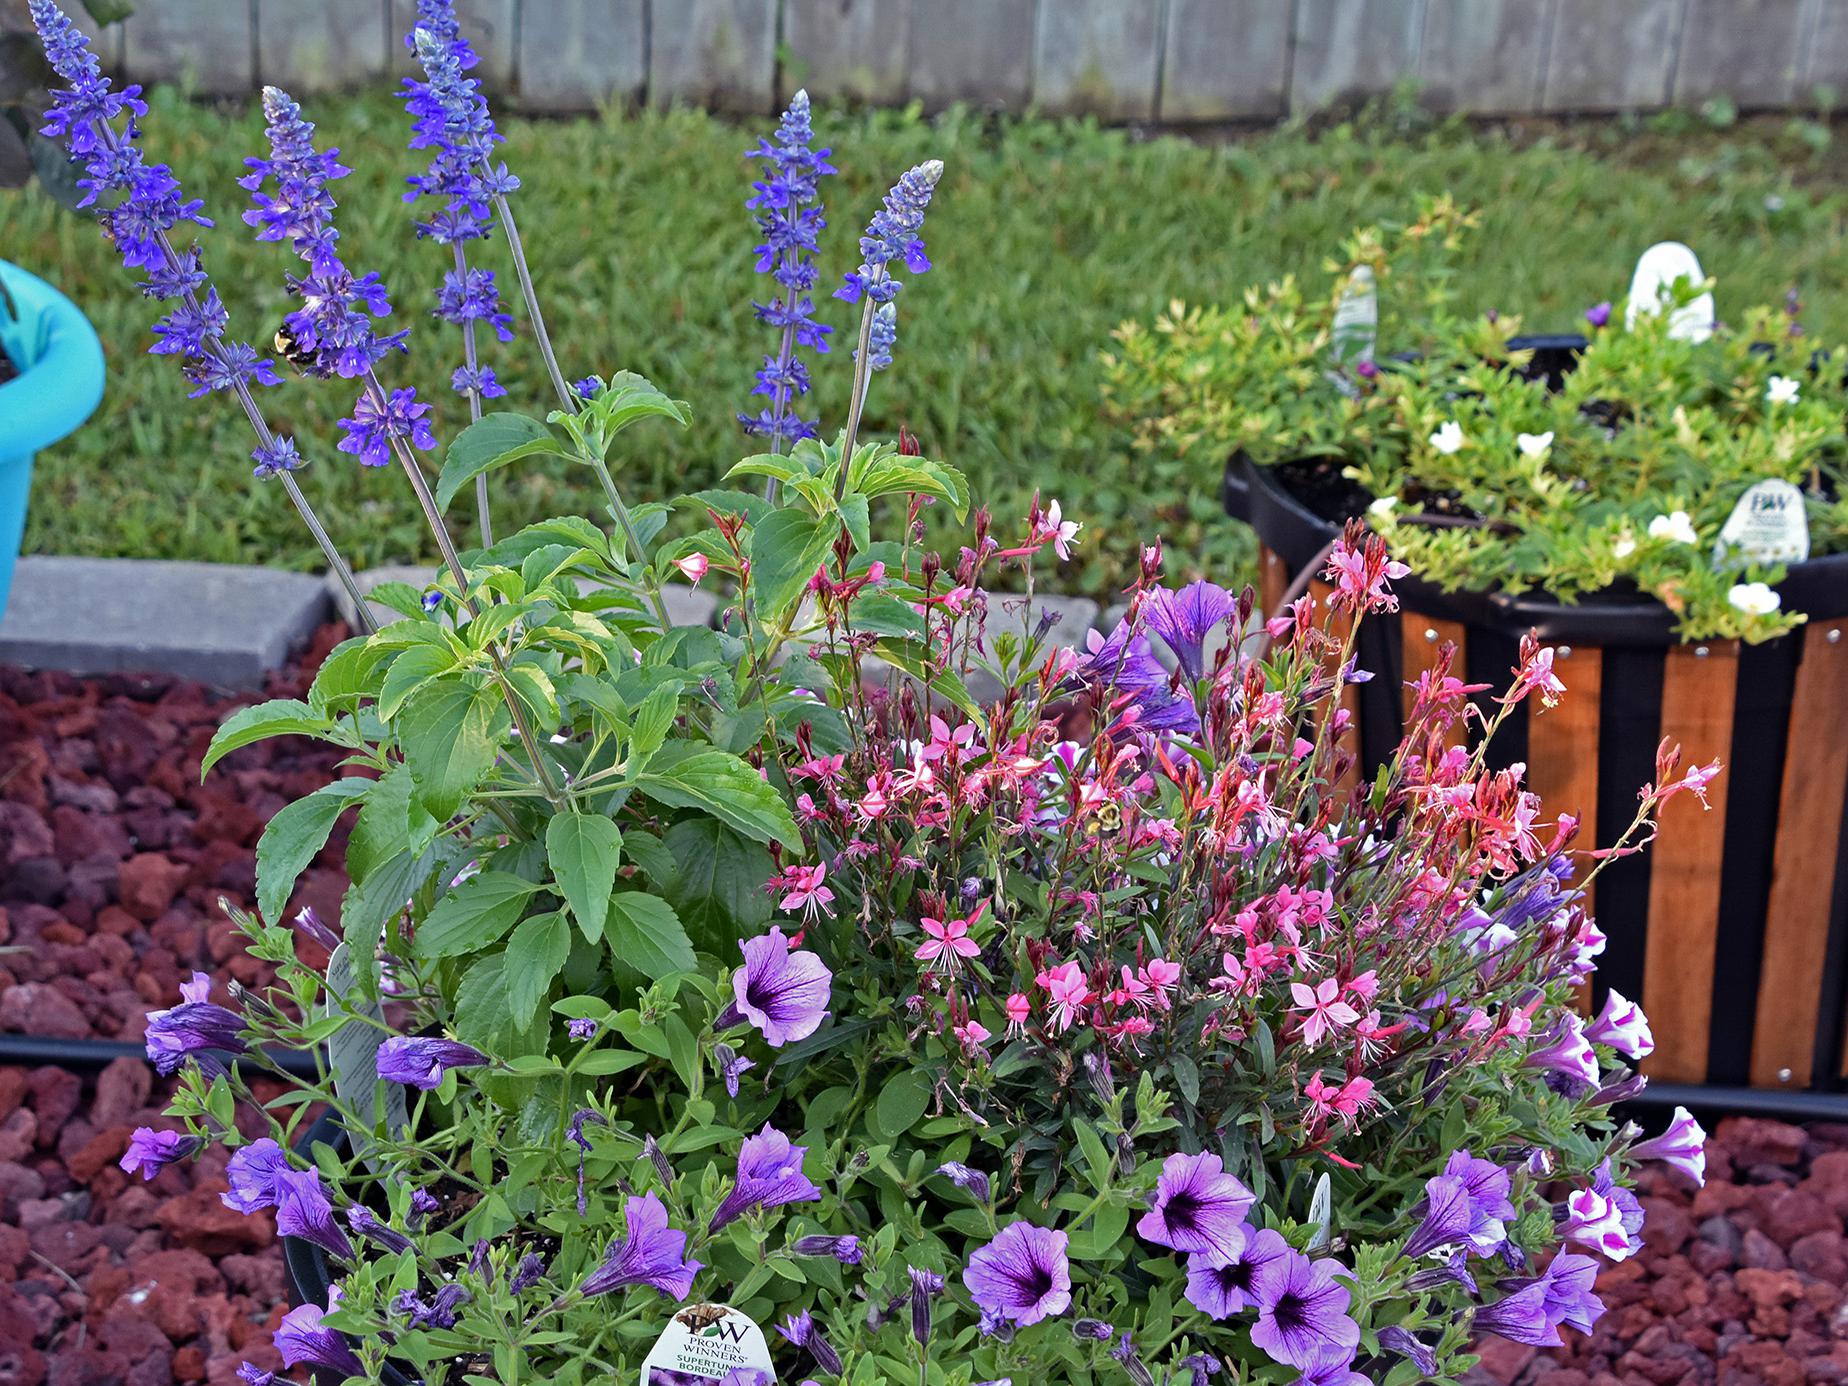 Containers can be planted at any time of year. This summer combination has tall Salvia Playin’ the Blues in the back, Gaura Karalee Petite Pink providing interest in the front, and Supertunia Bordeaux filling in all the extra space. (Photo by MSU Extension/Gary Bachman)